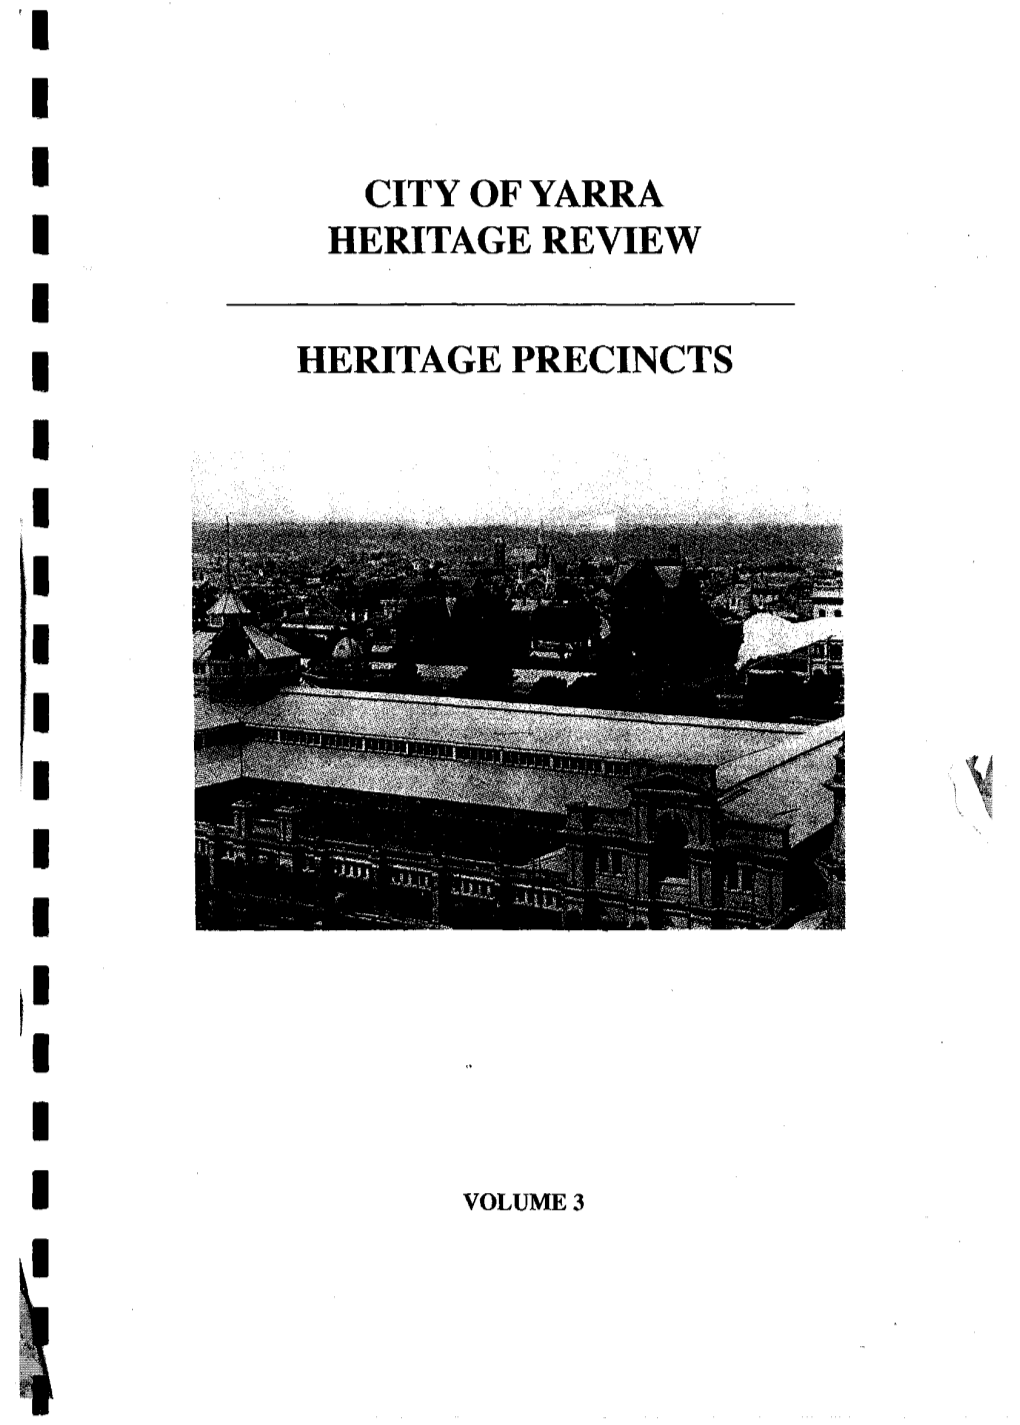 City of Yarra Heritage Review 1998 Vol 3